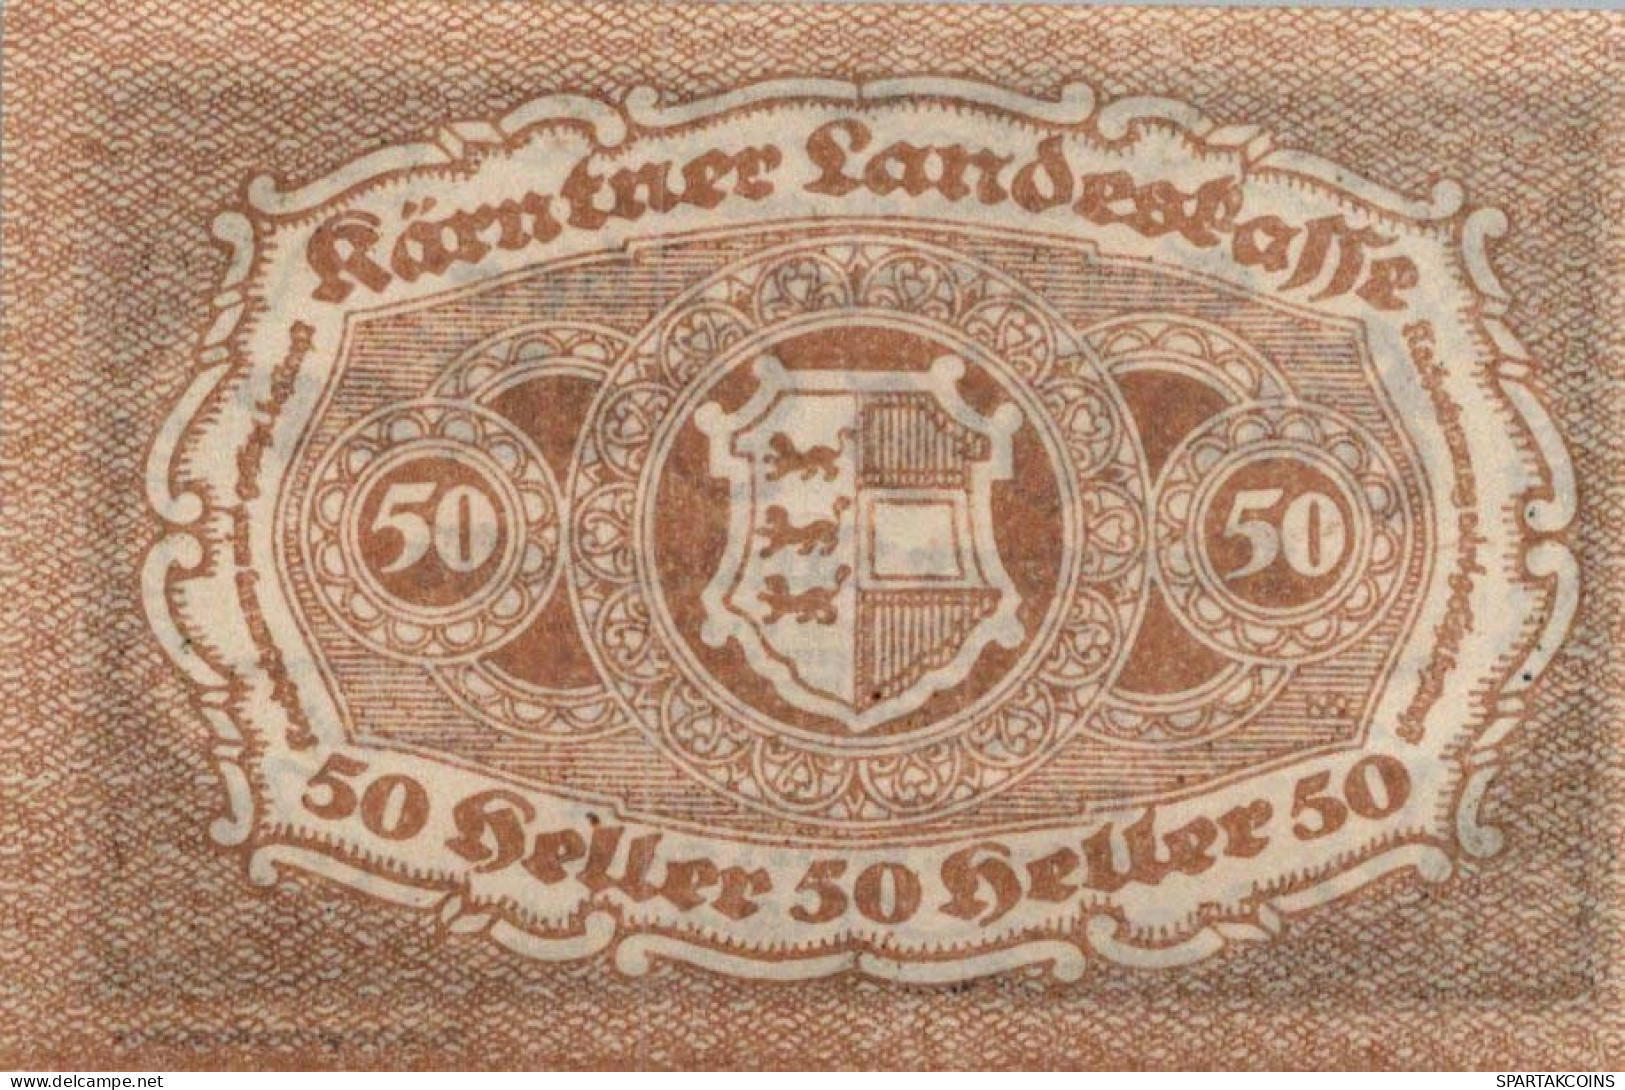 50 HELLER 1920 Stadt CARINTHIA Carinthia UNC Österreich Notgeld Banknote #PI134 - [11] Local Banknote Issues